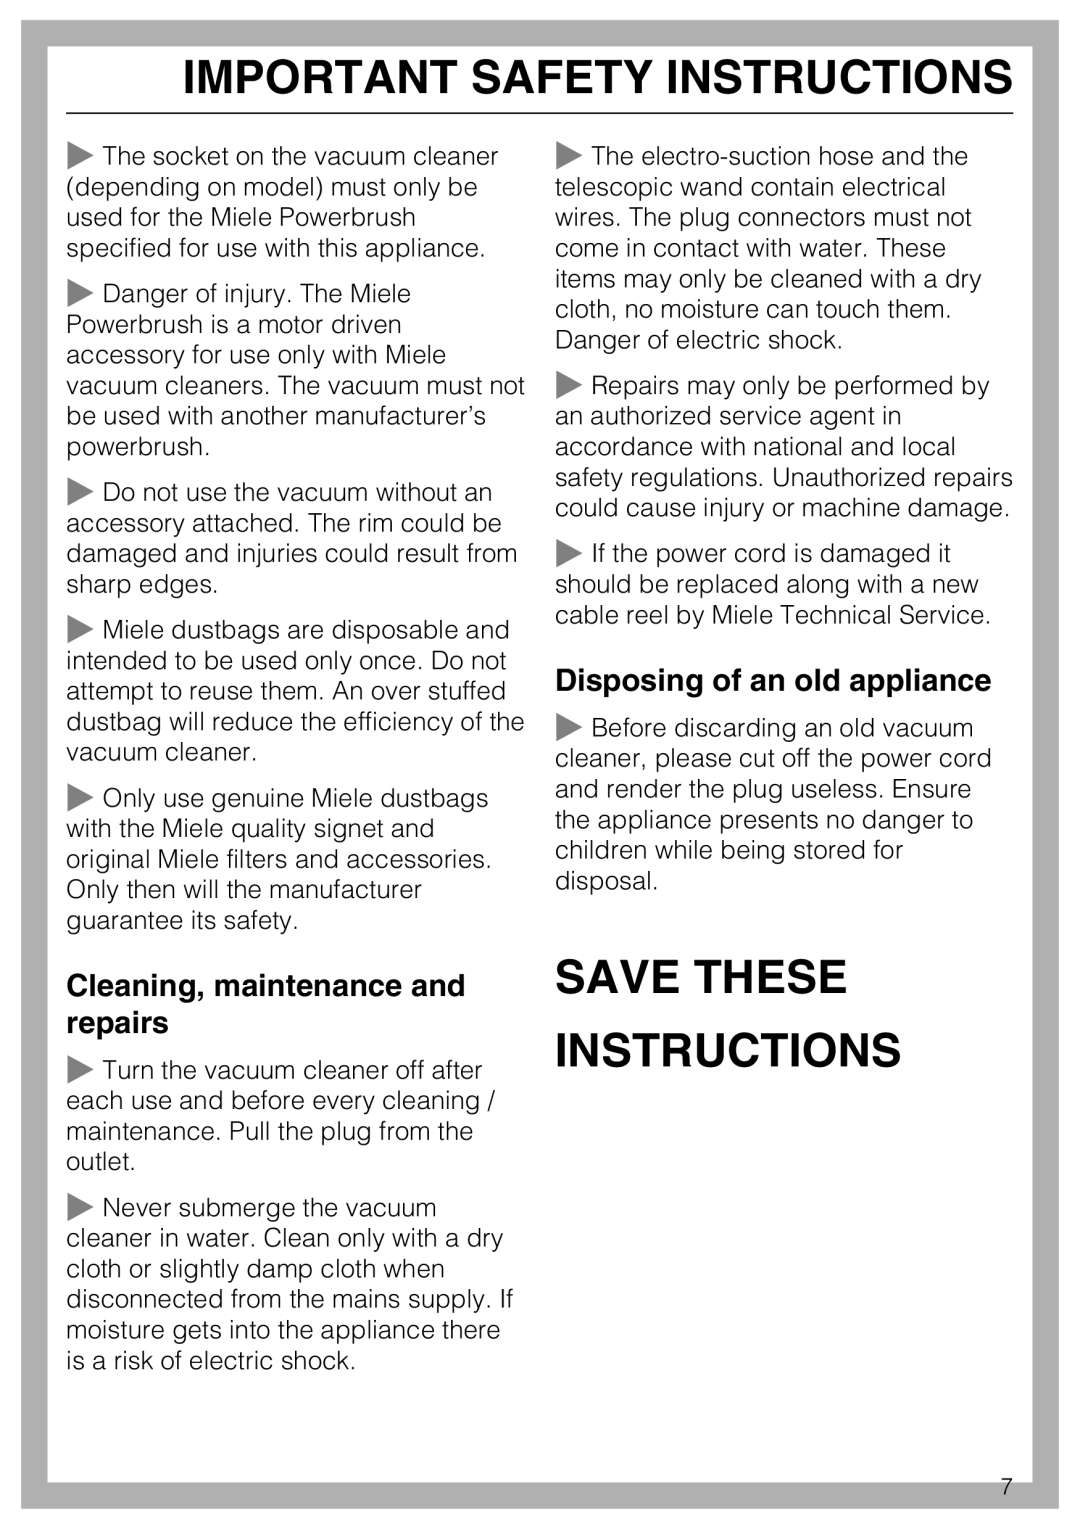 Miele S 5001 manual Save These Instructions, Disposing of an old appliance, Cleaning, maintenance and repairs 